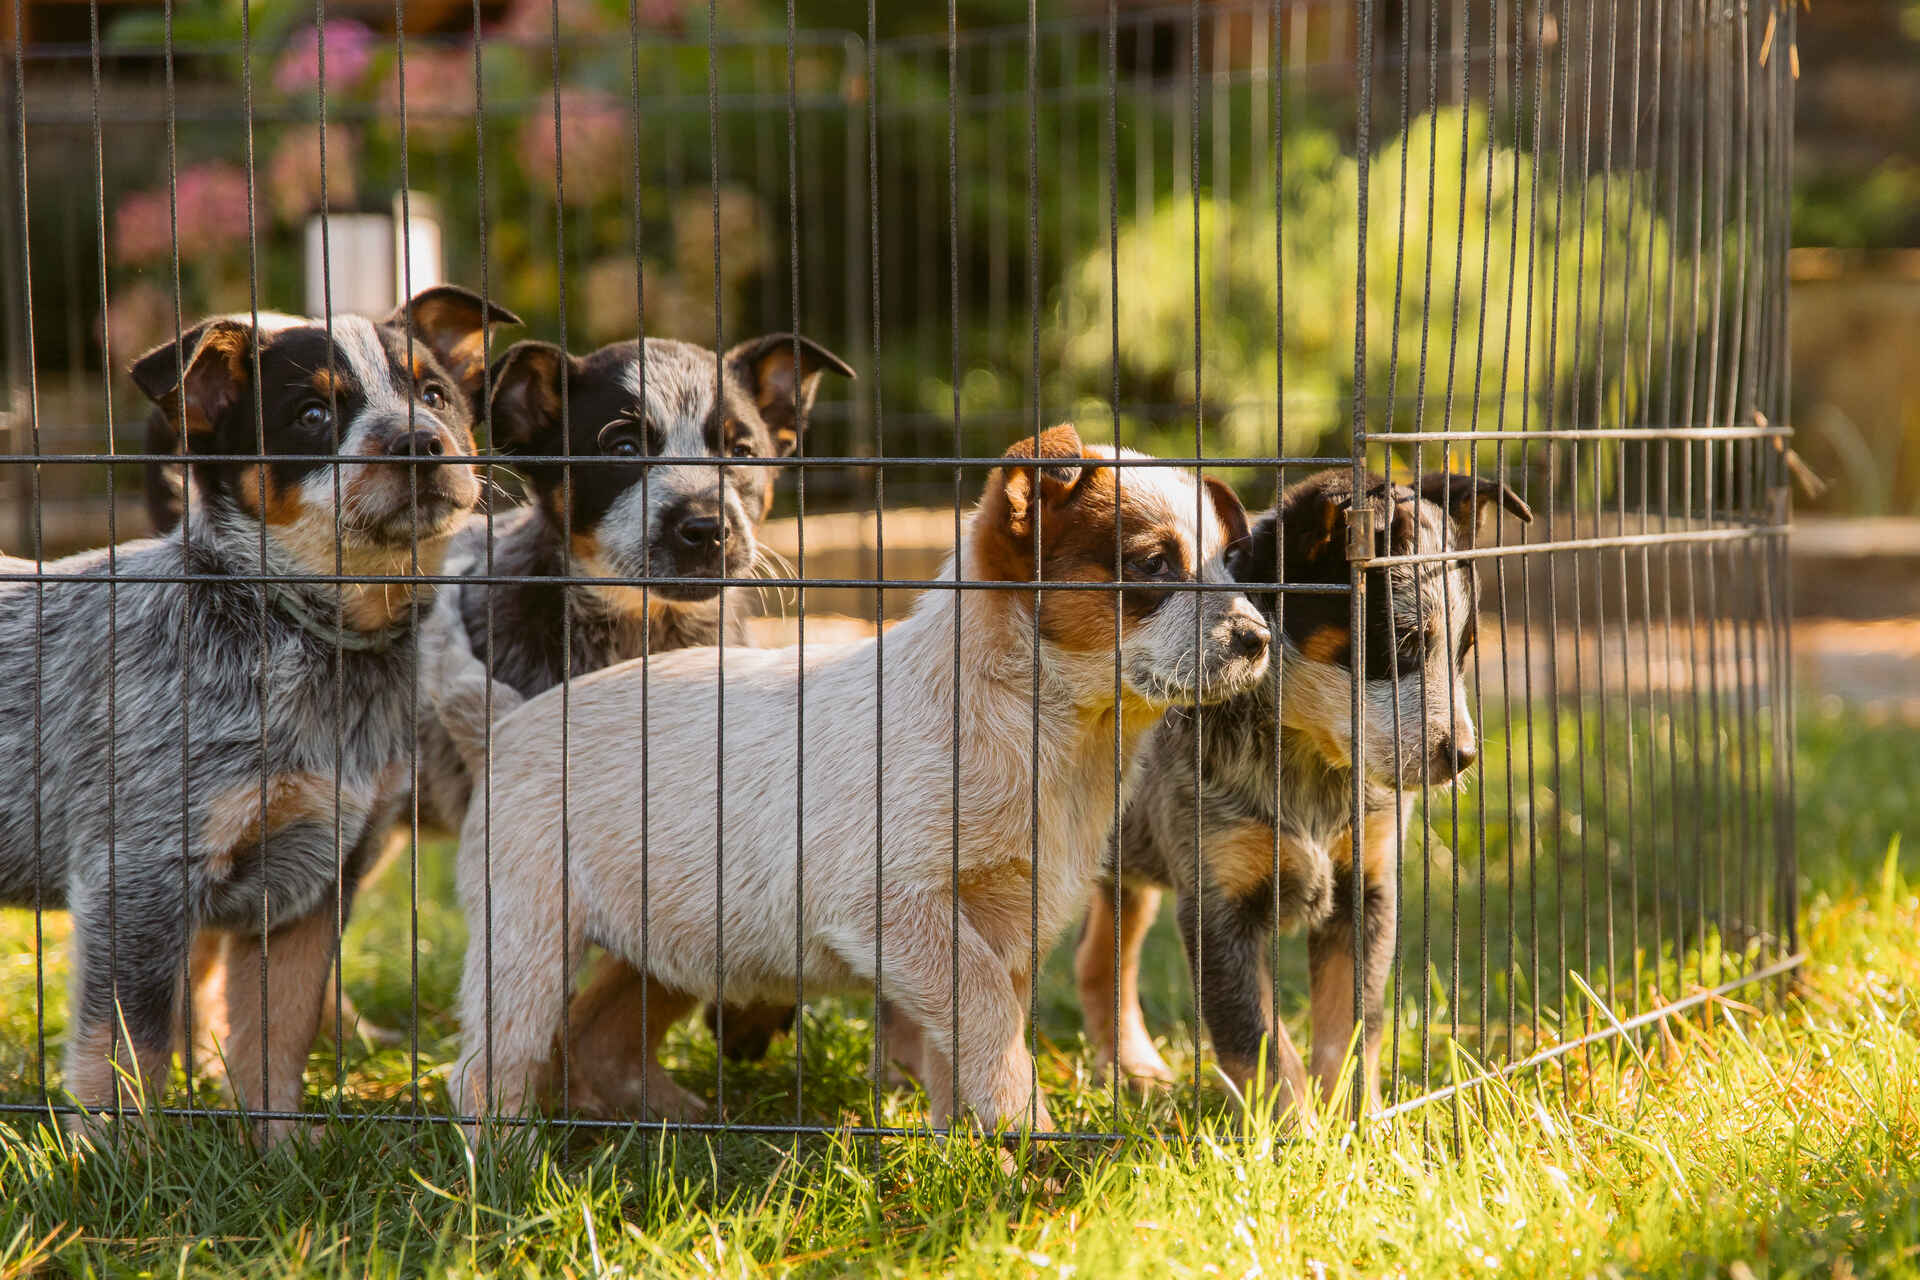 A litter of puppies looking out through a grill fence